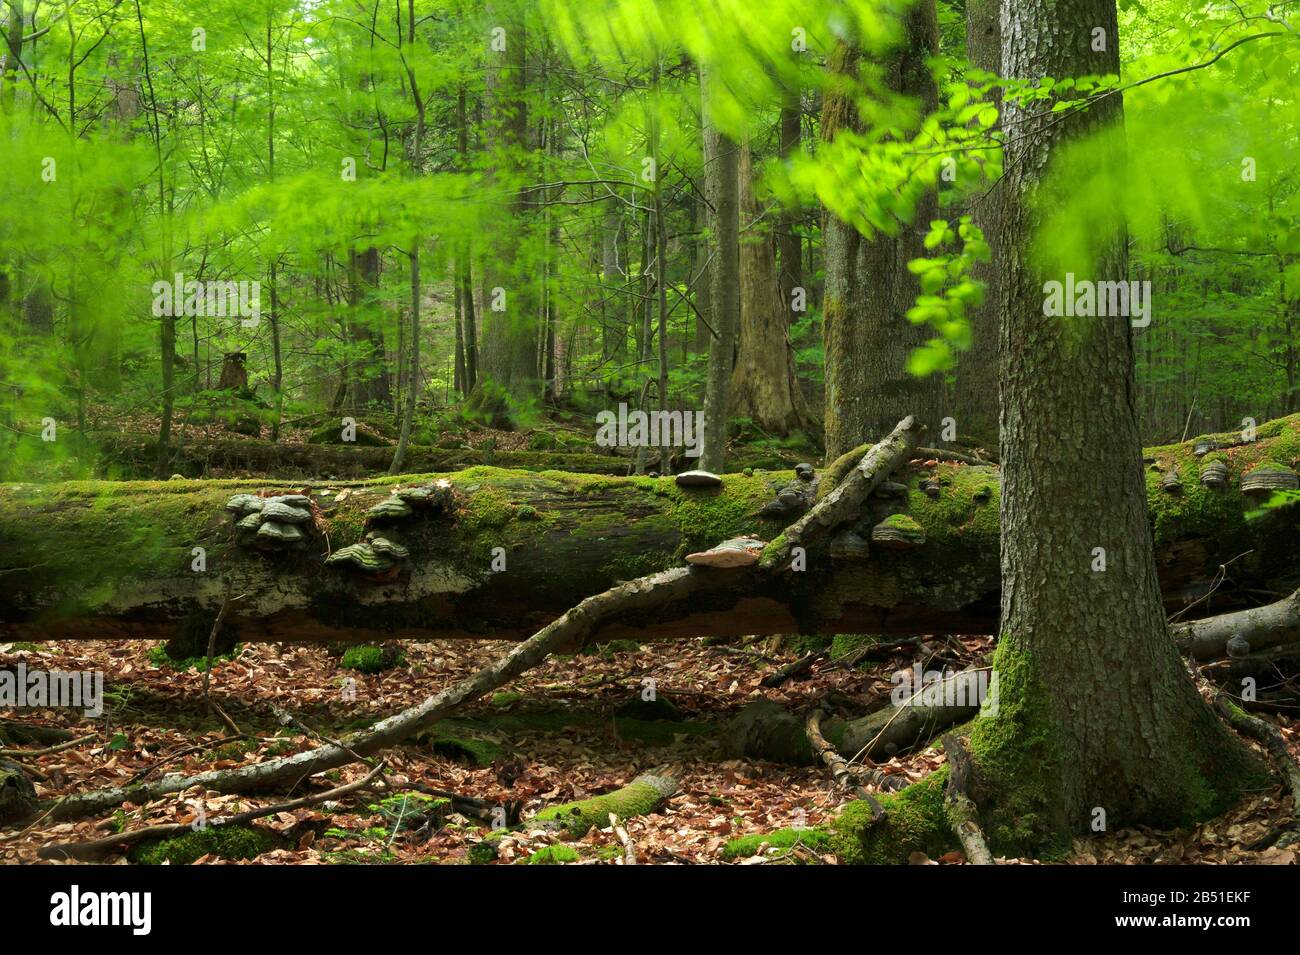 Bavarian Forest National Park / Germany: 'Mittelsteighütte' is one of the last primary forests of Europe with tall / old beech, fir and spruce trees. Stock Photo